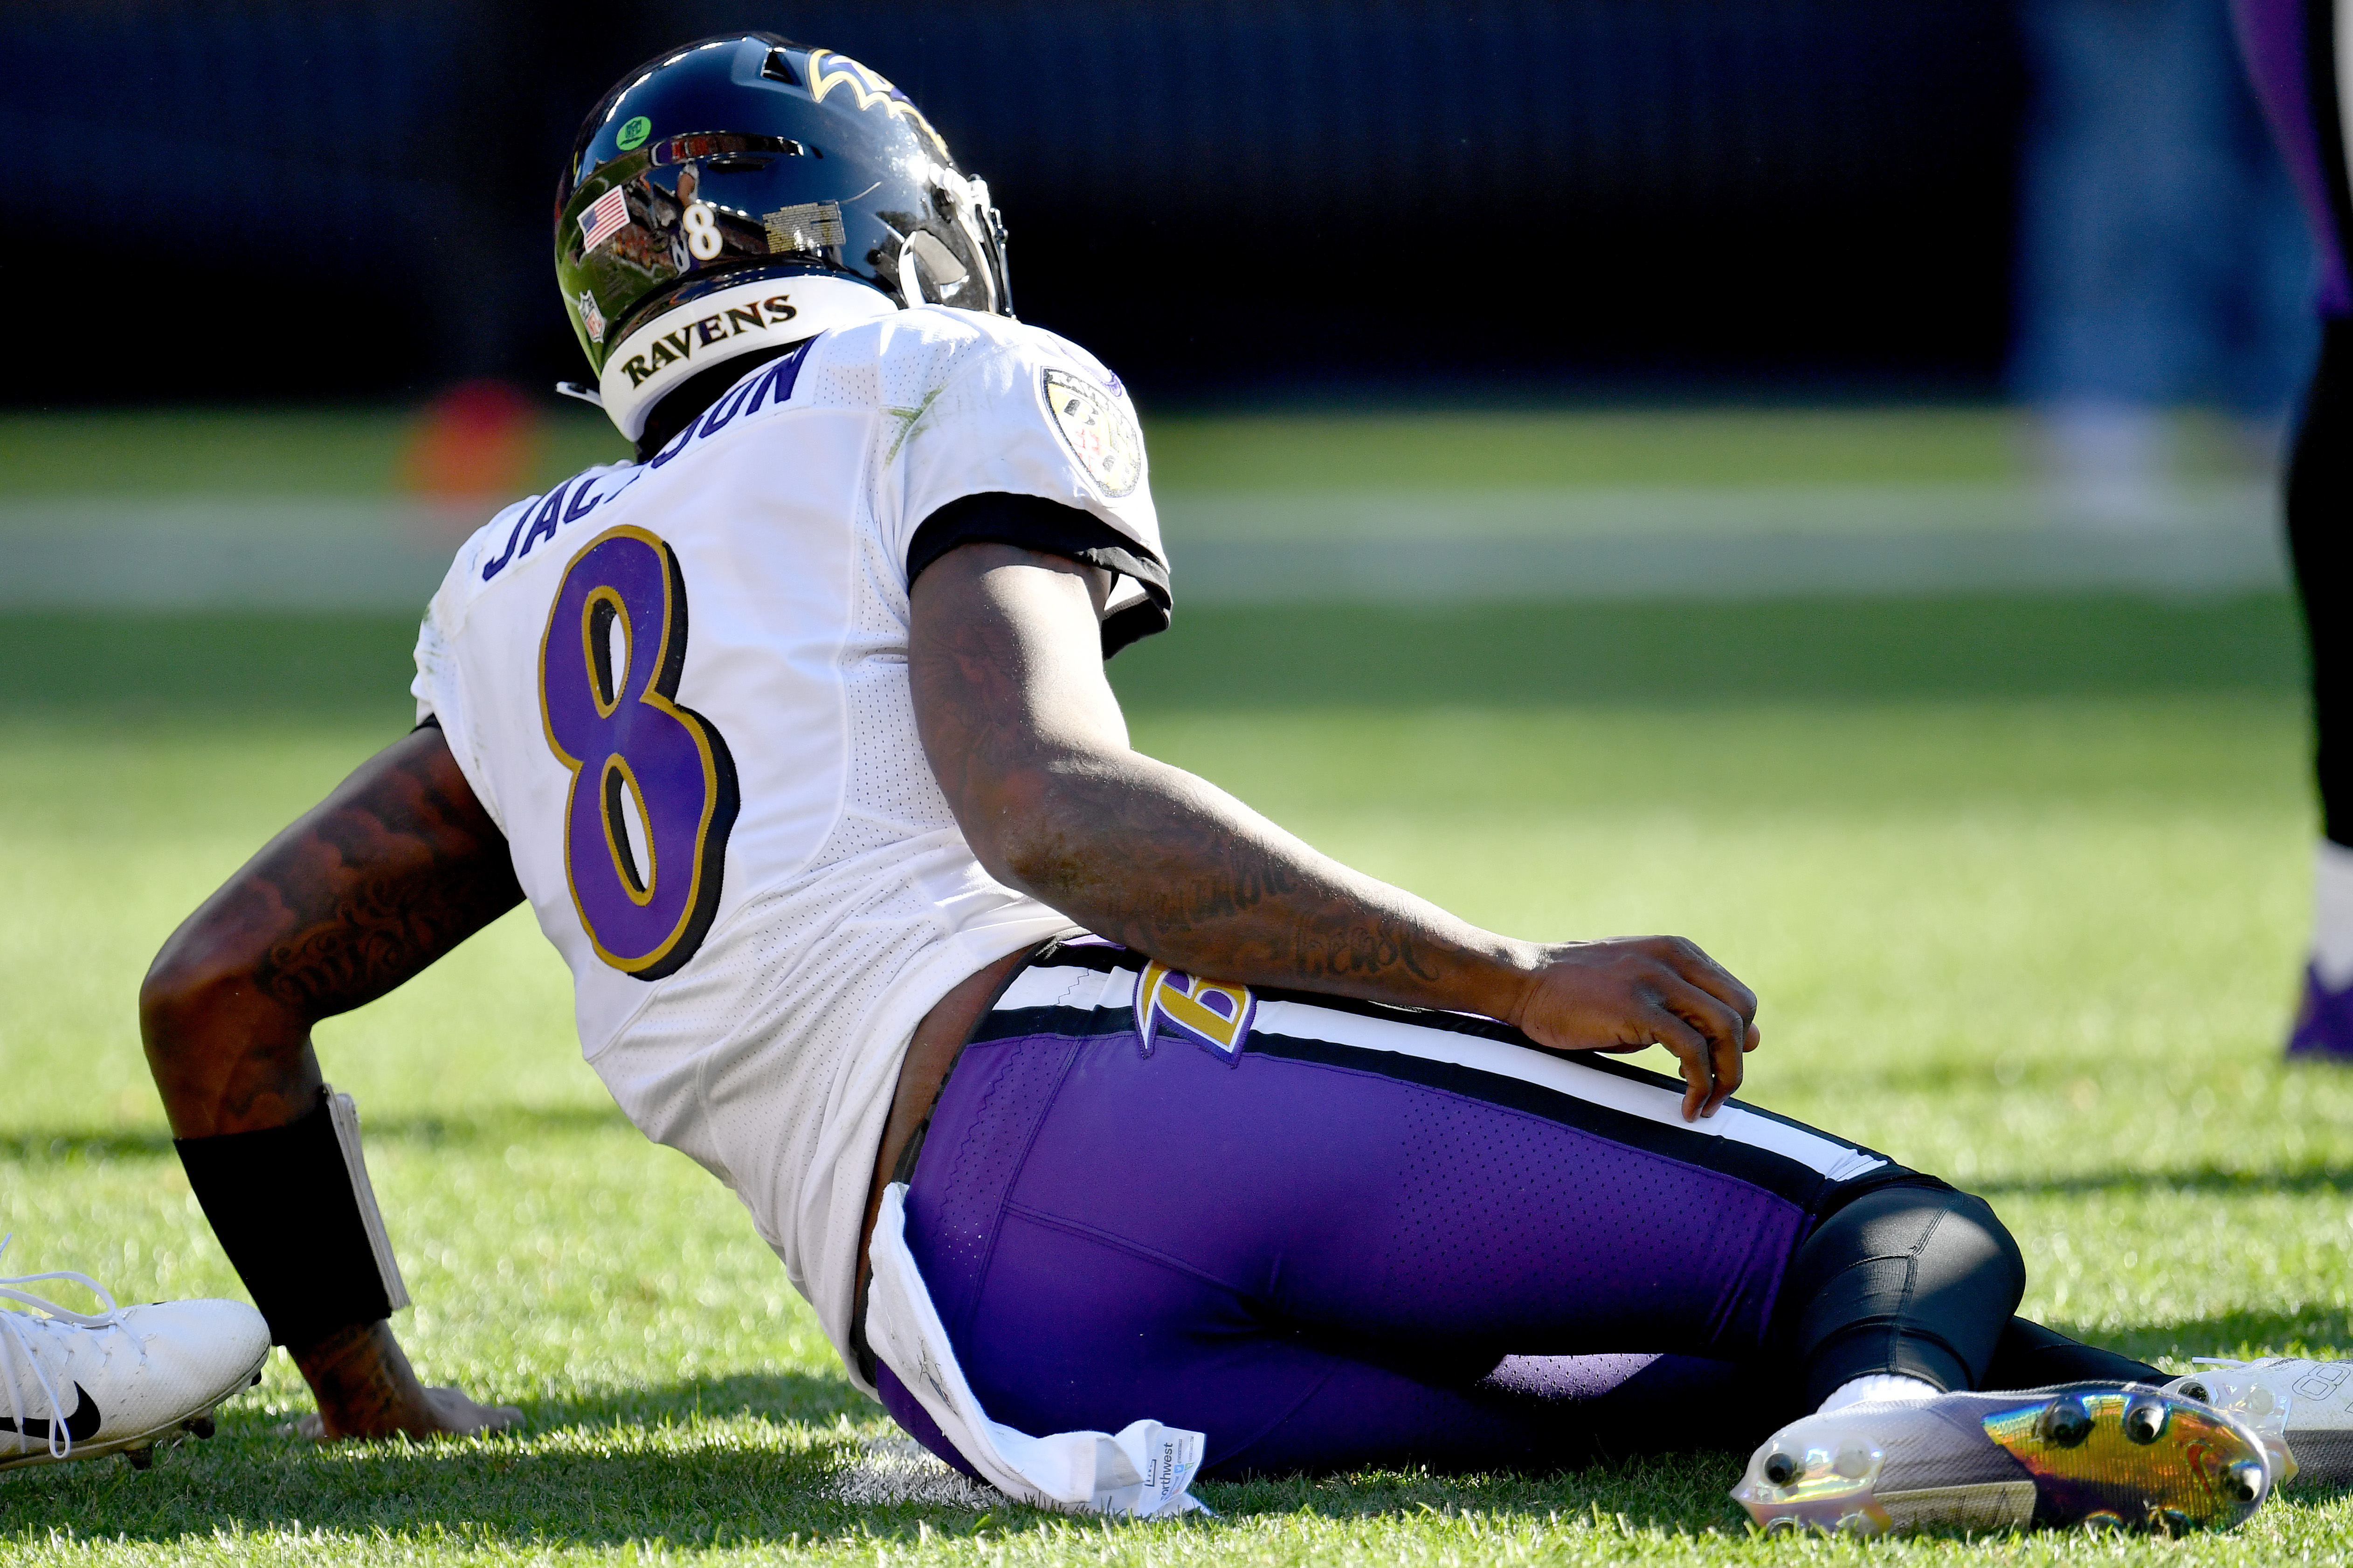 Ravens QB Lamar Jackson on the ground after suffering injury against the Browns